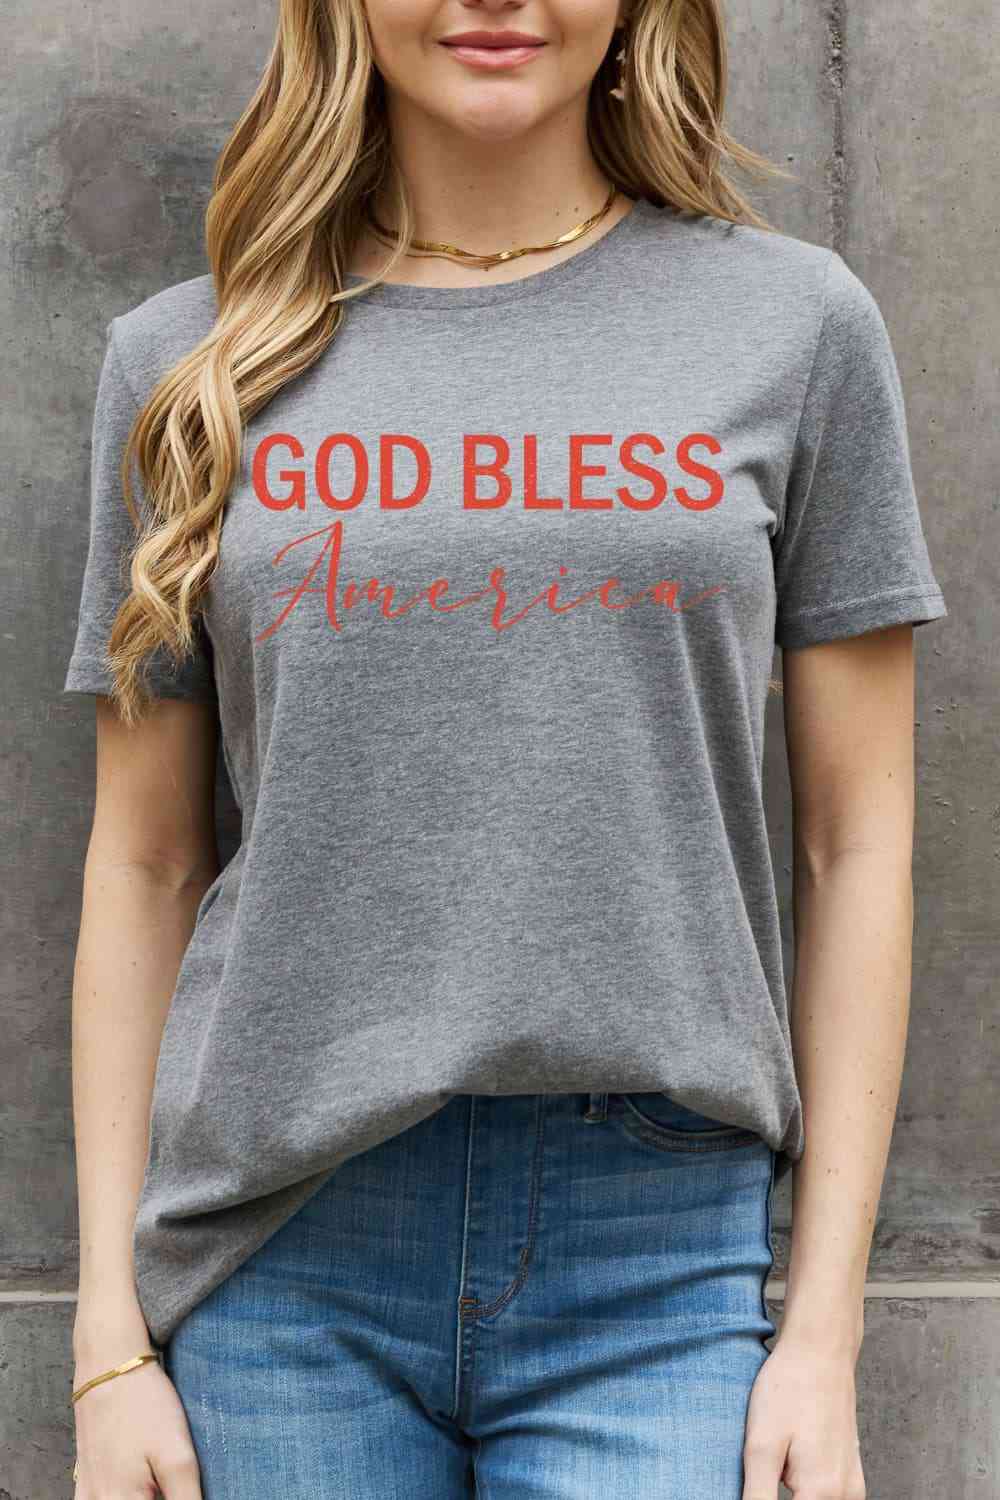 Simply Love GOD BLESS AMERICA Graphic Cotton Tee Charcoal S 